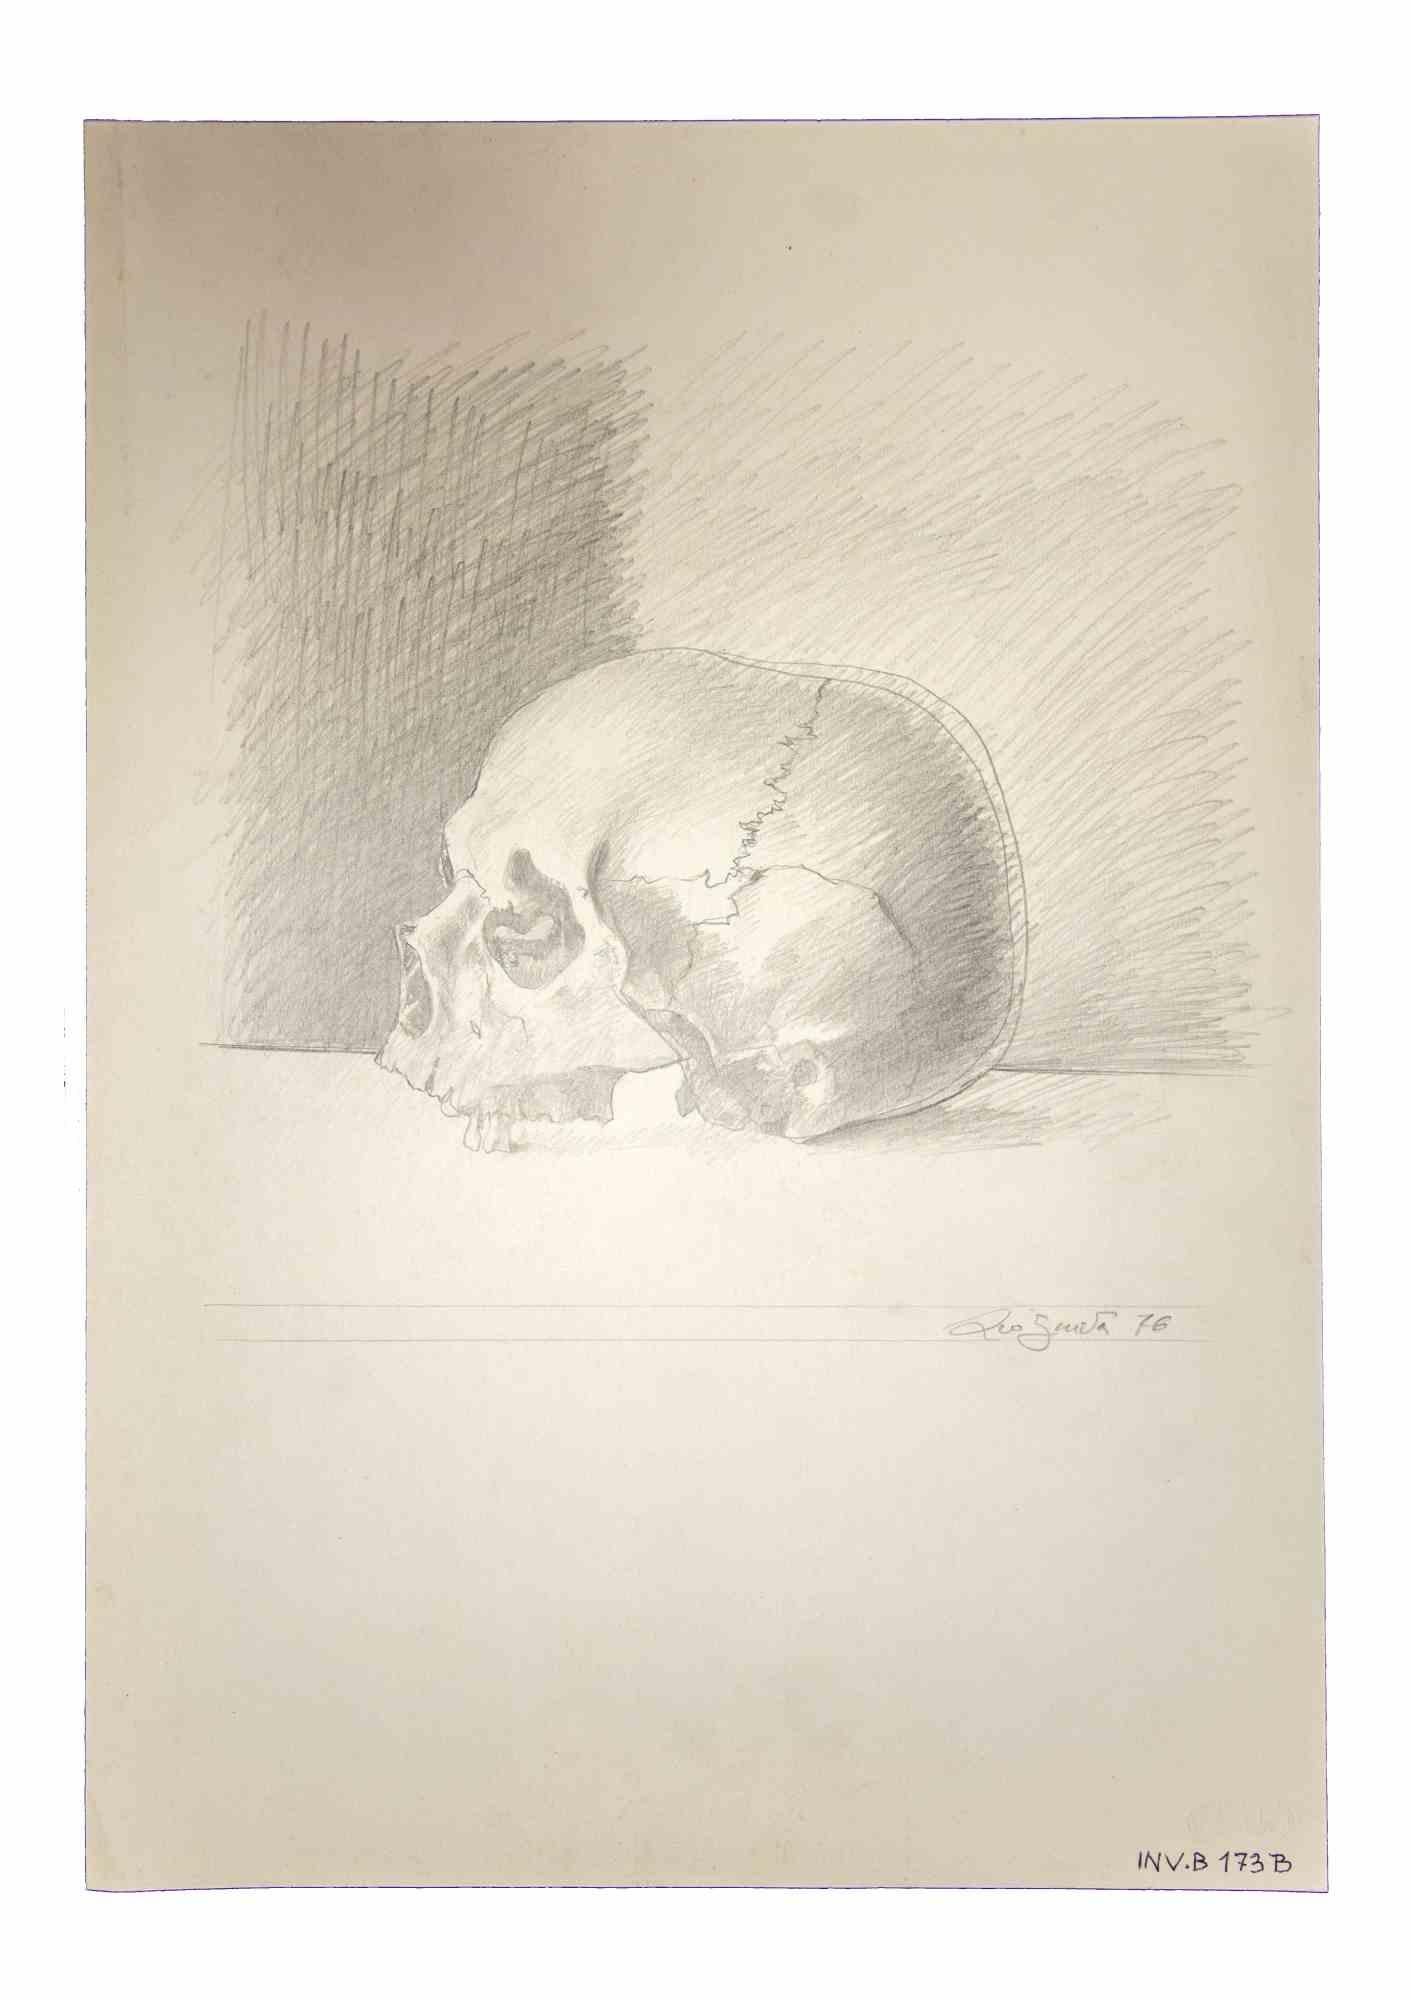 Skull is an original artwork realized  in 1976  by the italian Contemporary artist Leo Guida  (1992 - 2017).

Pencil drawing on ivory-colored paper.
 
Hand-signed and dated on the lower margin. Cat. INV.B 173B

In this artwork is represented a